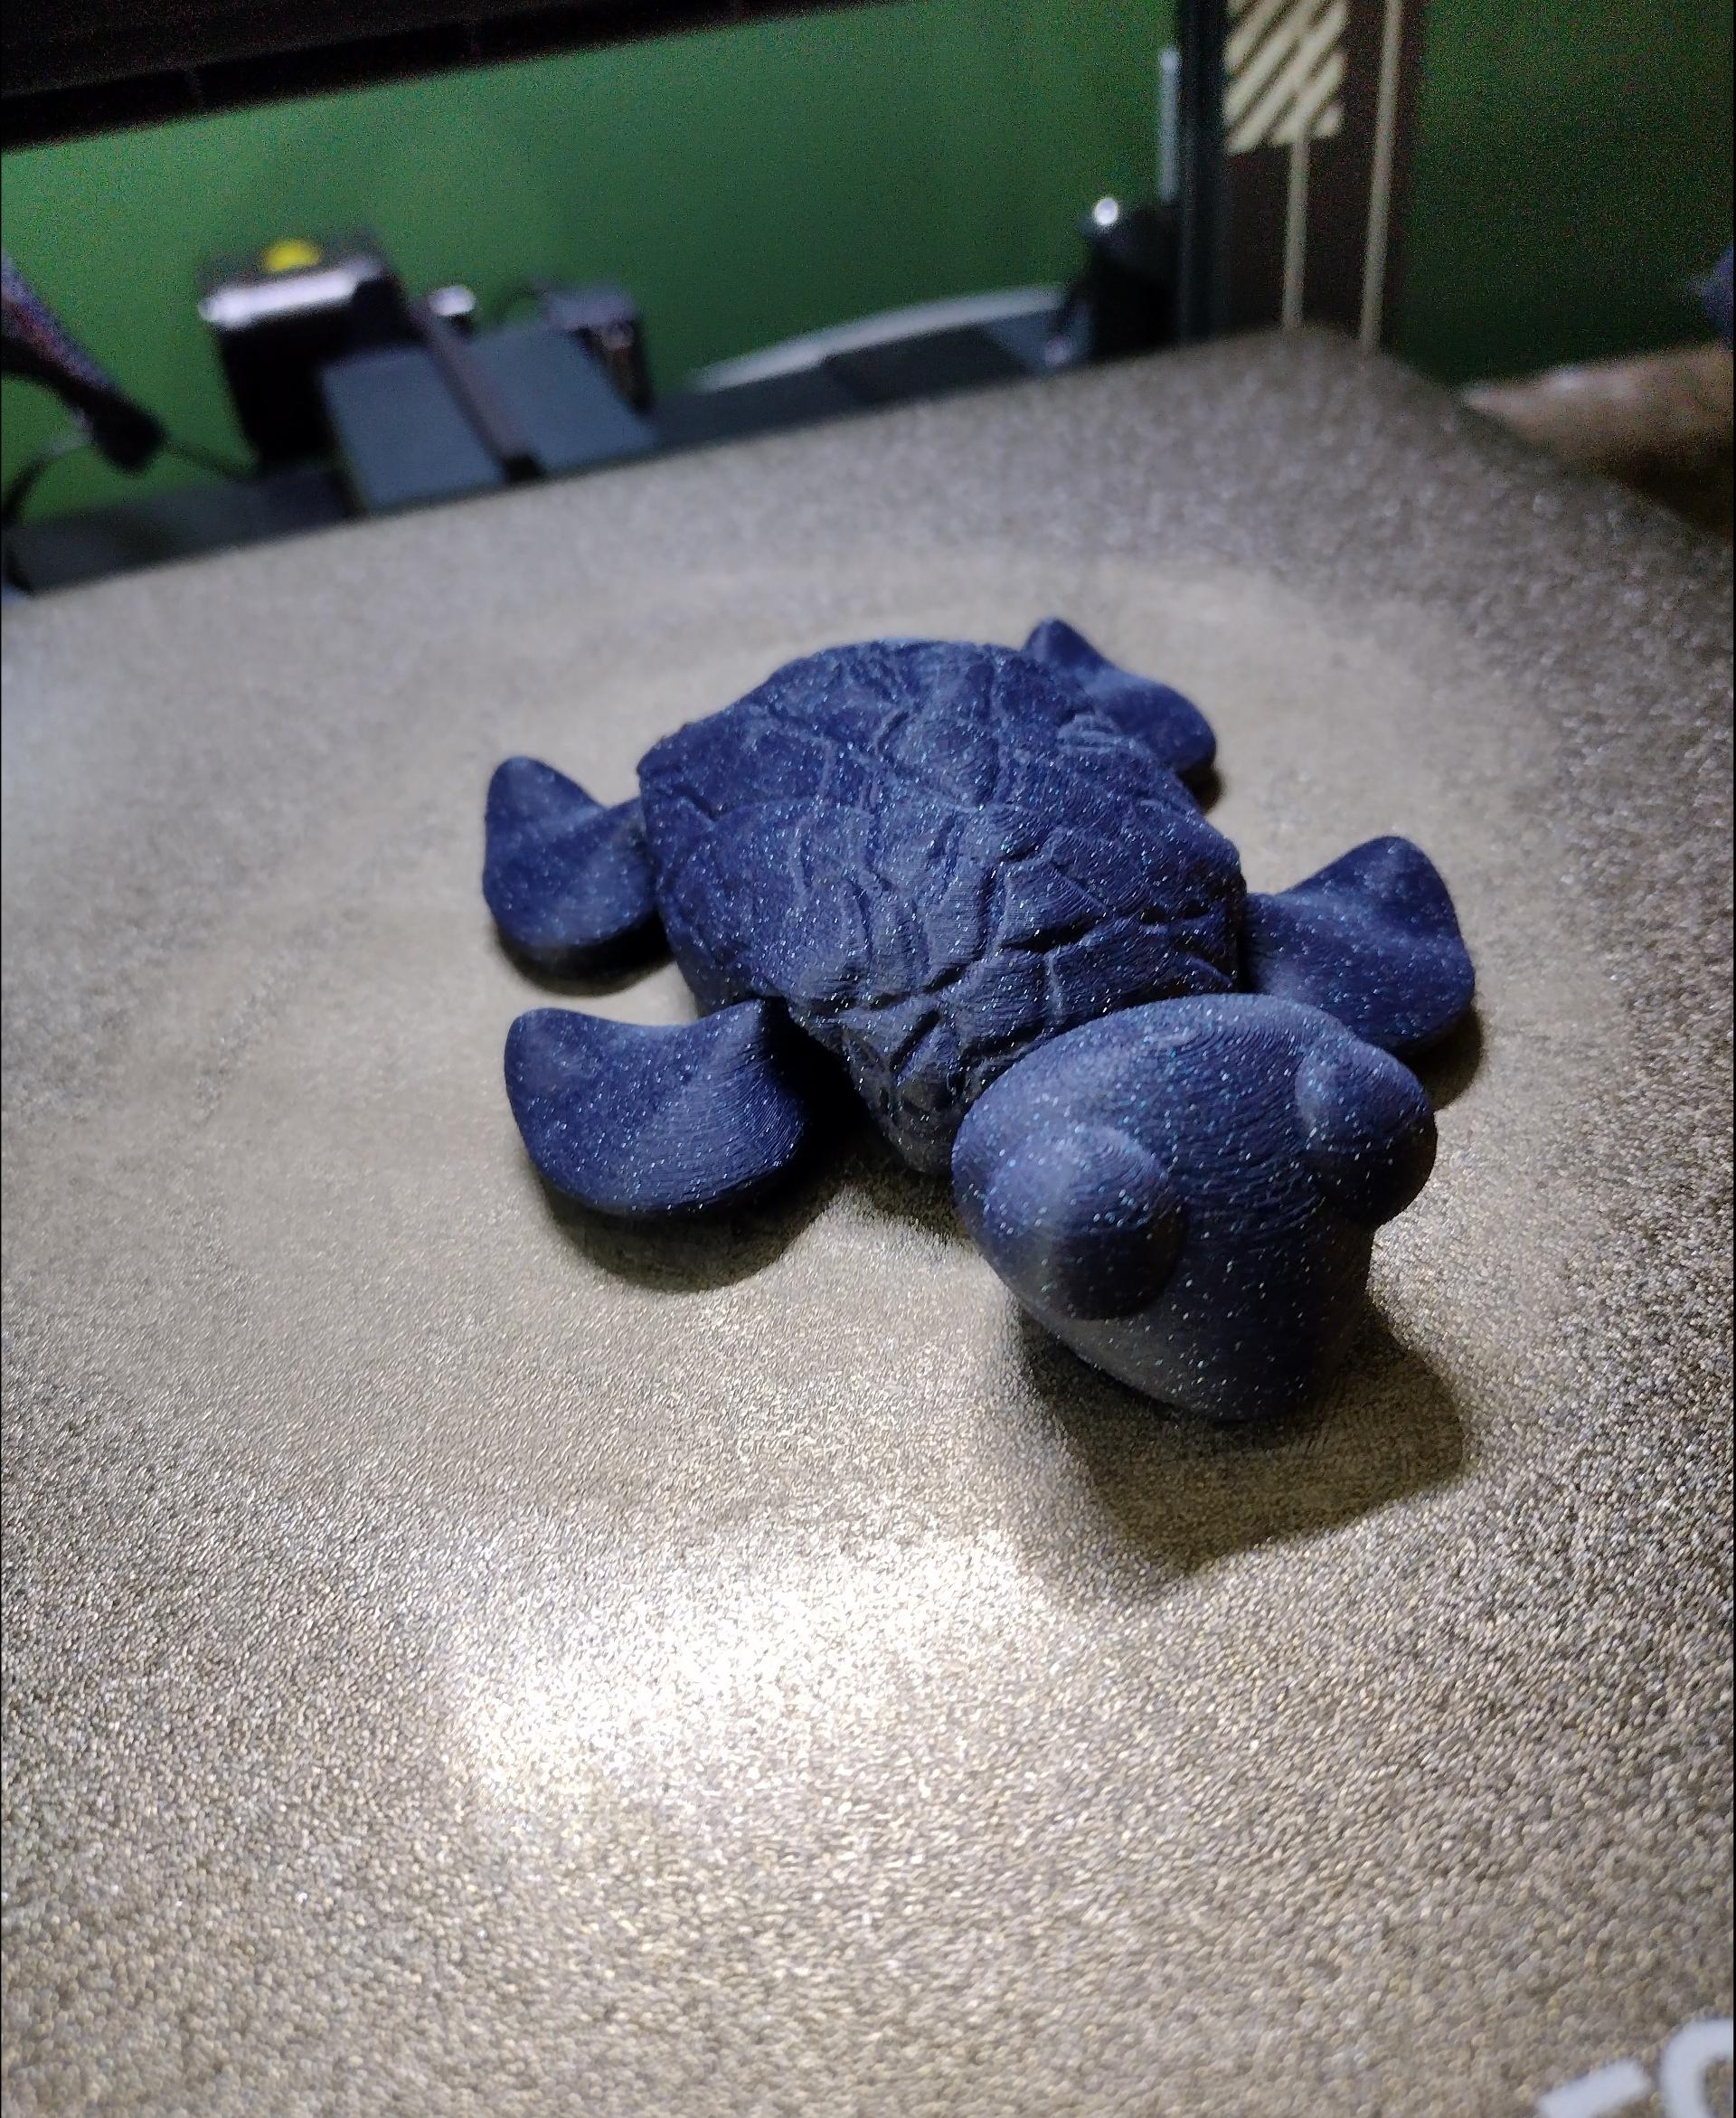 Cute Flexi Turtle - Printed in Galaxy Blue
.2 layer height
15% infill
250mms - 3d model